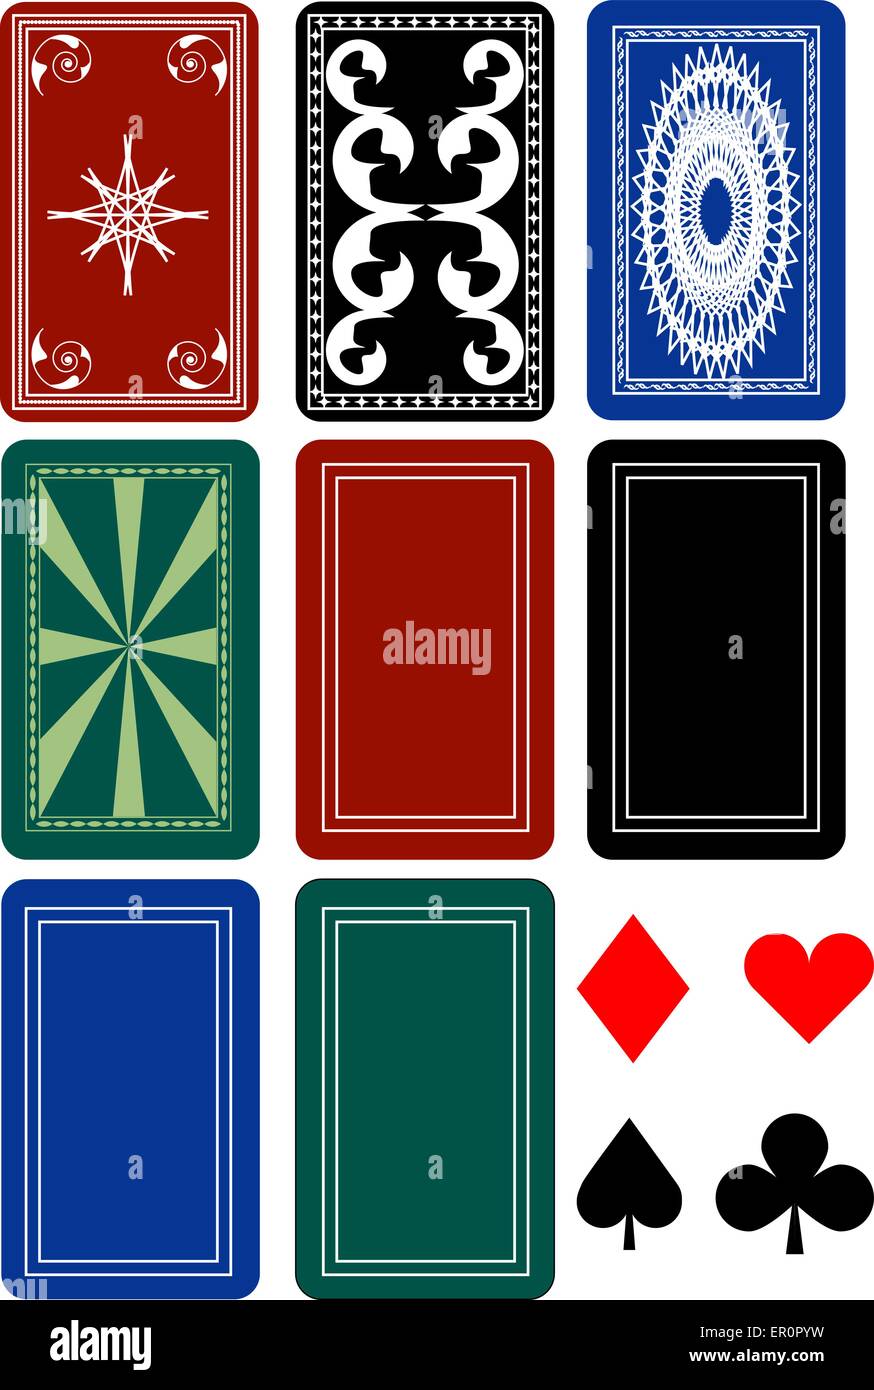 Set of Playing Card Back Designs Stock Vector